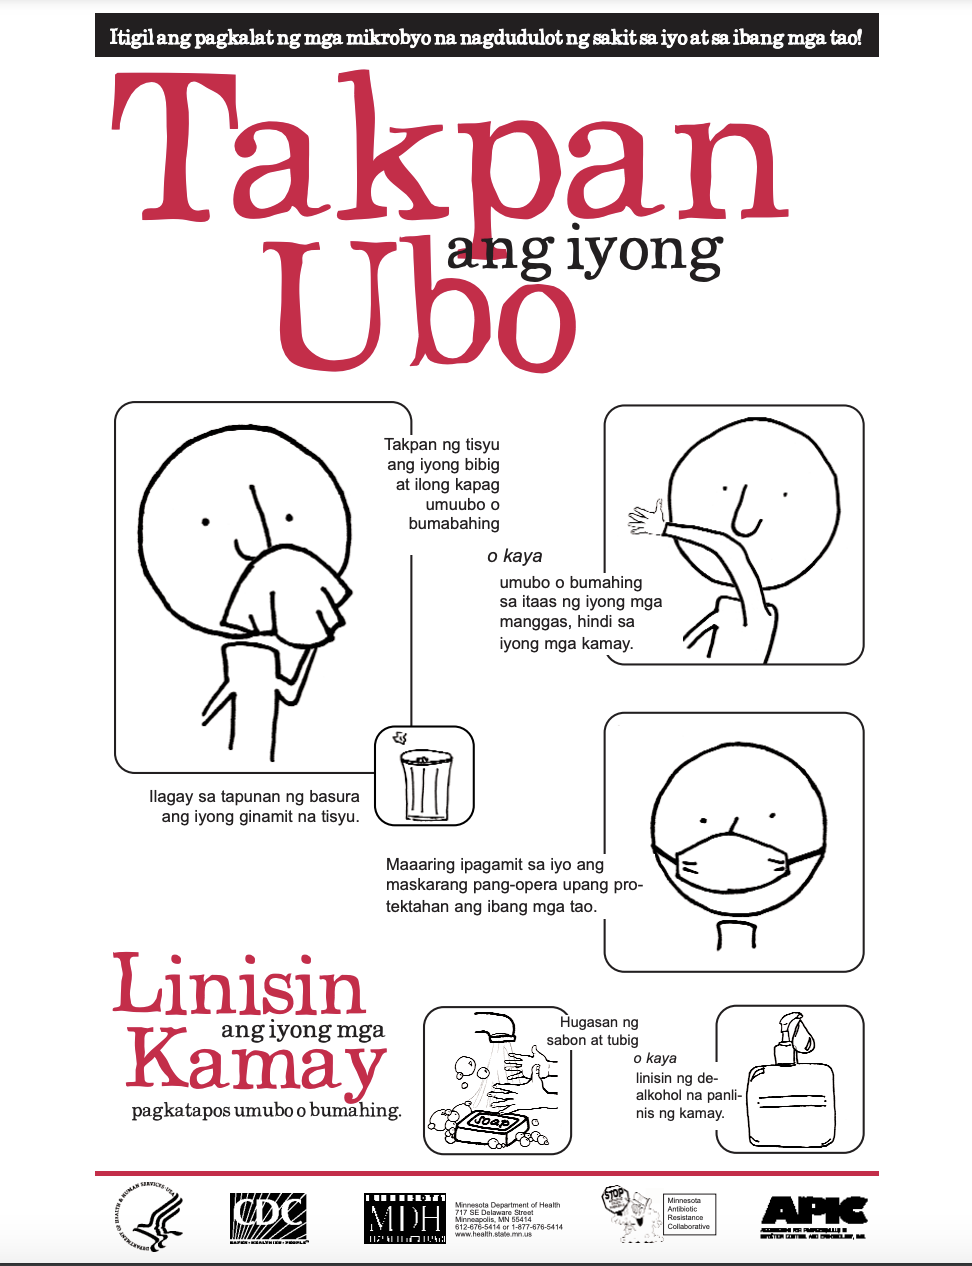 “Cover Your Cough” flyer
                    (Tagalog)